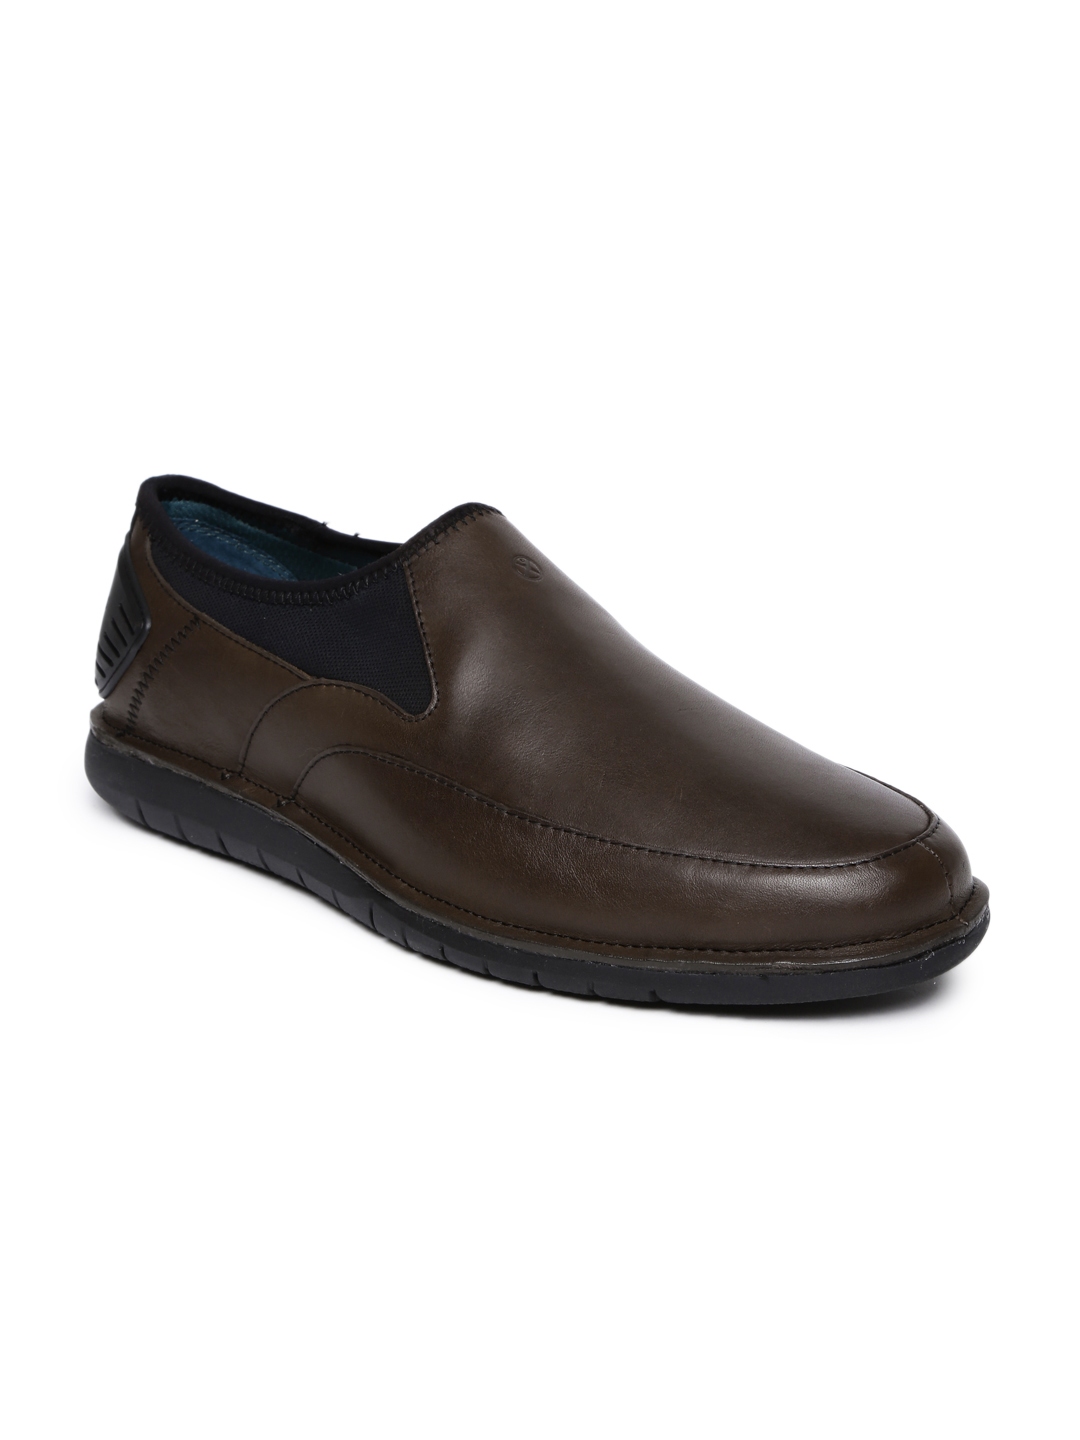 hush puppies formal shoes myntra